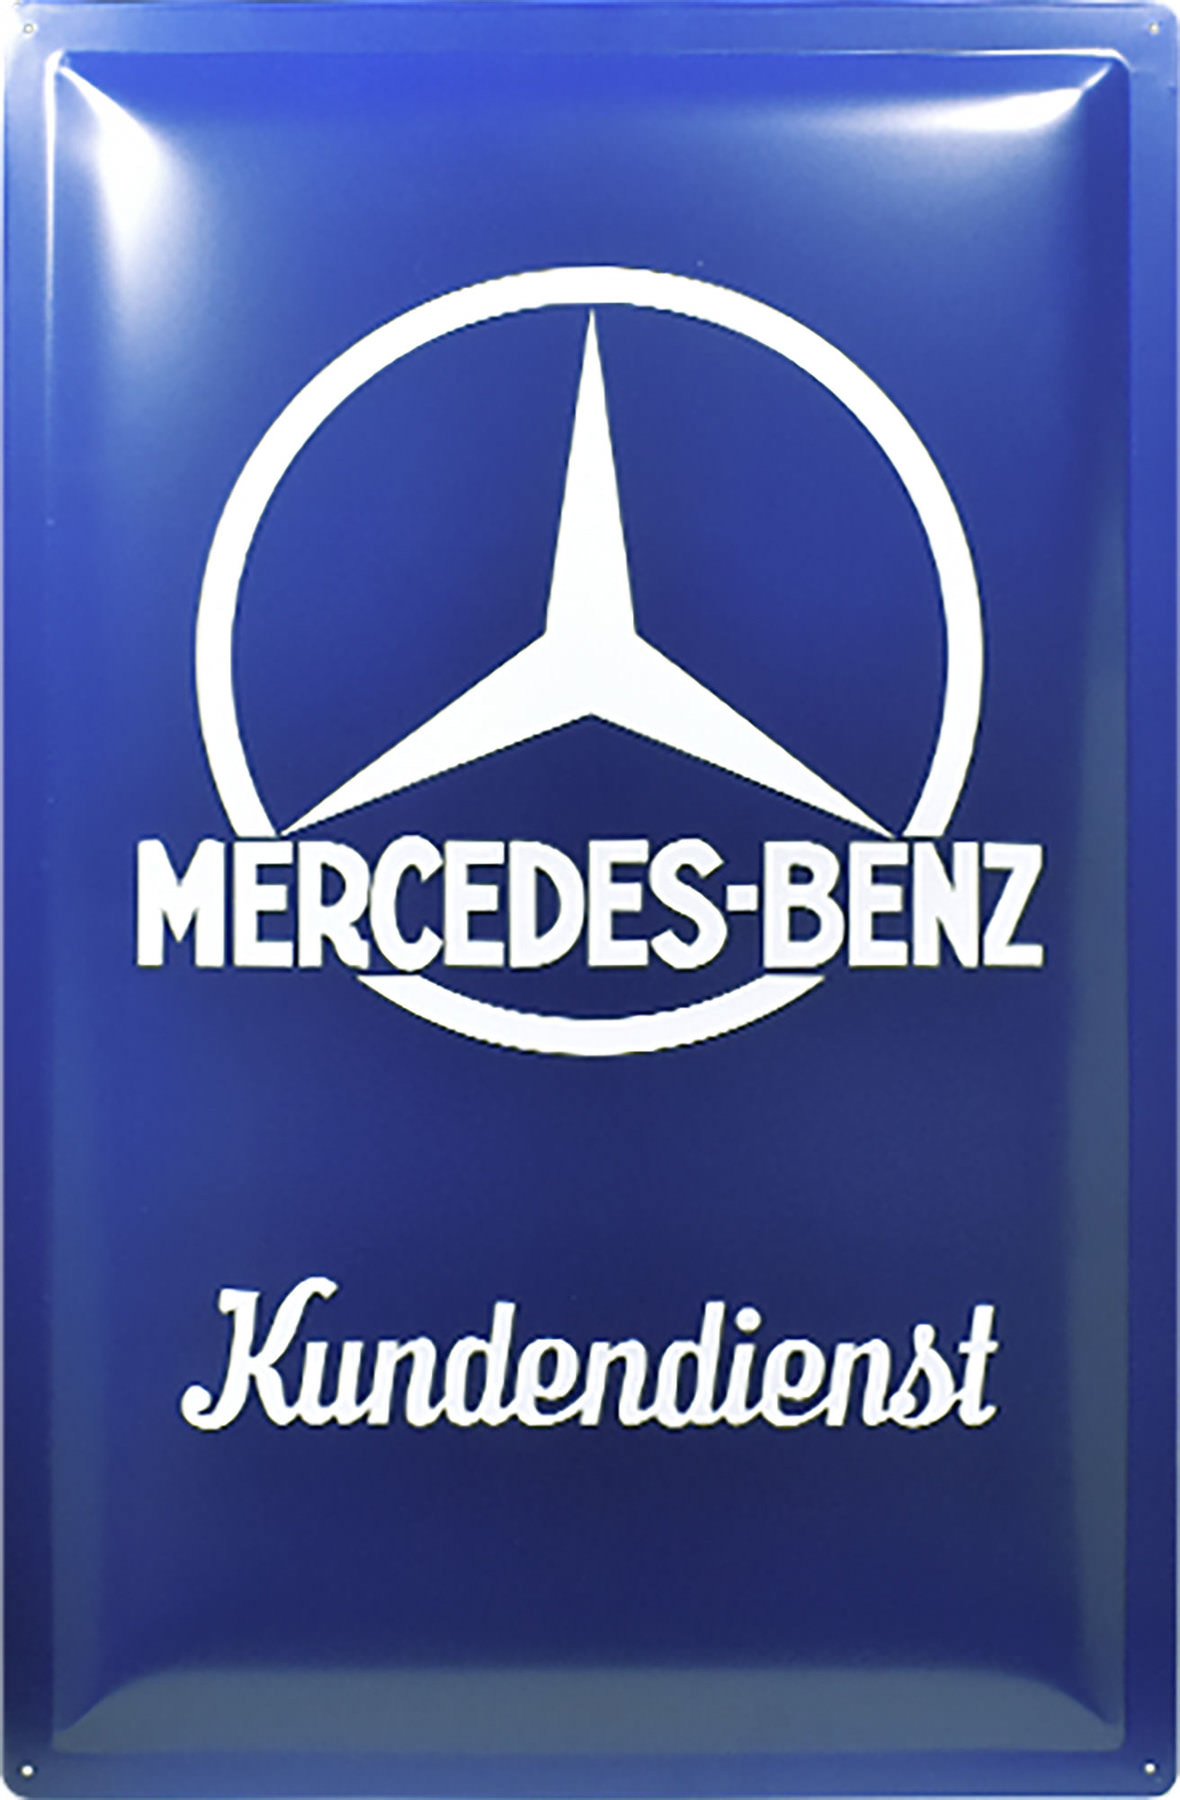 Buy Retro Metal Sign Mercedes Benz Kundendienst Size 40x60cm Louis Motorcycle Clothing And Technology